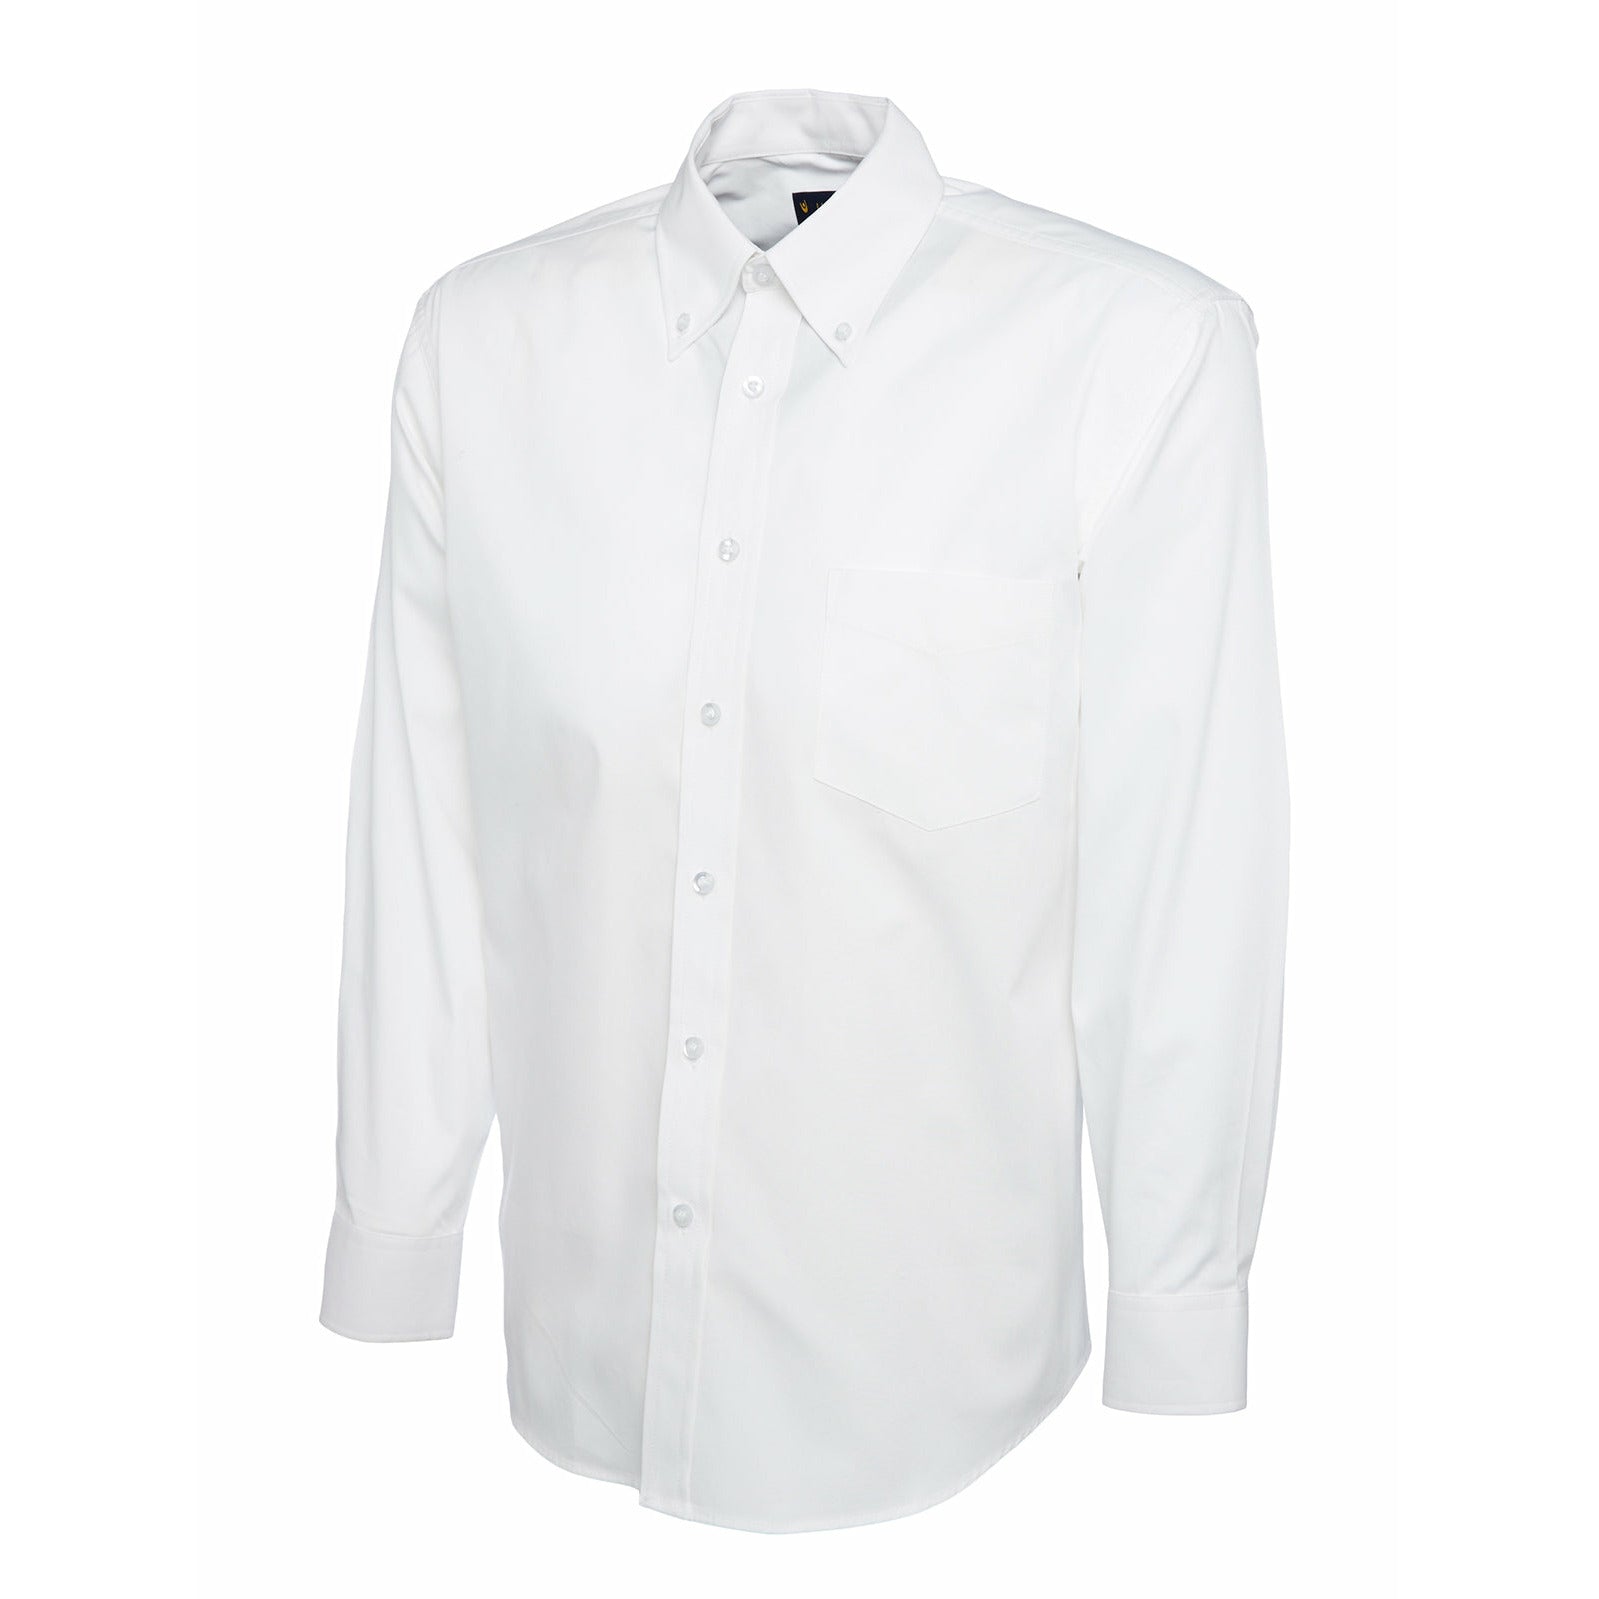 Mens Pinpoint Oxford Full Sleeve Shirt - White